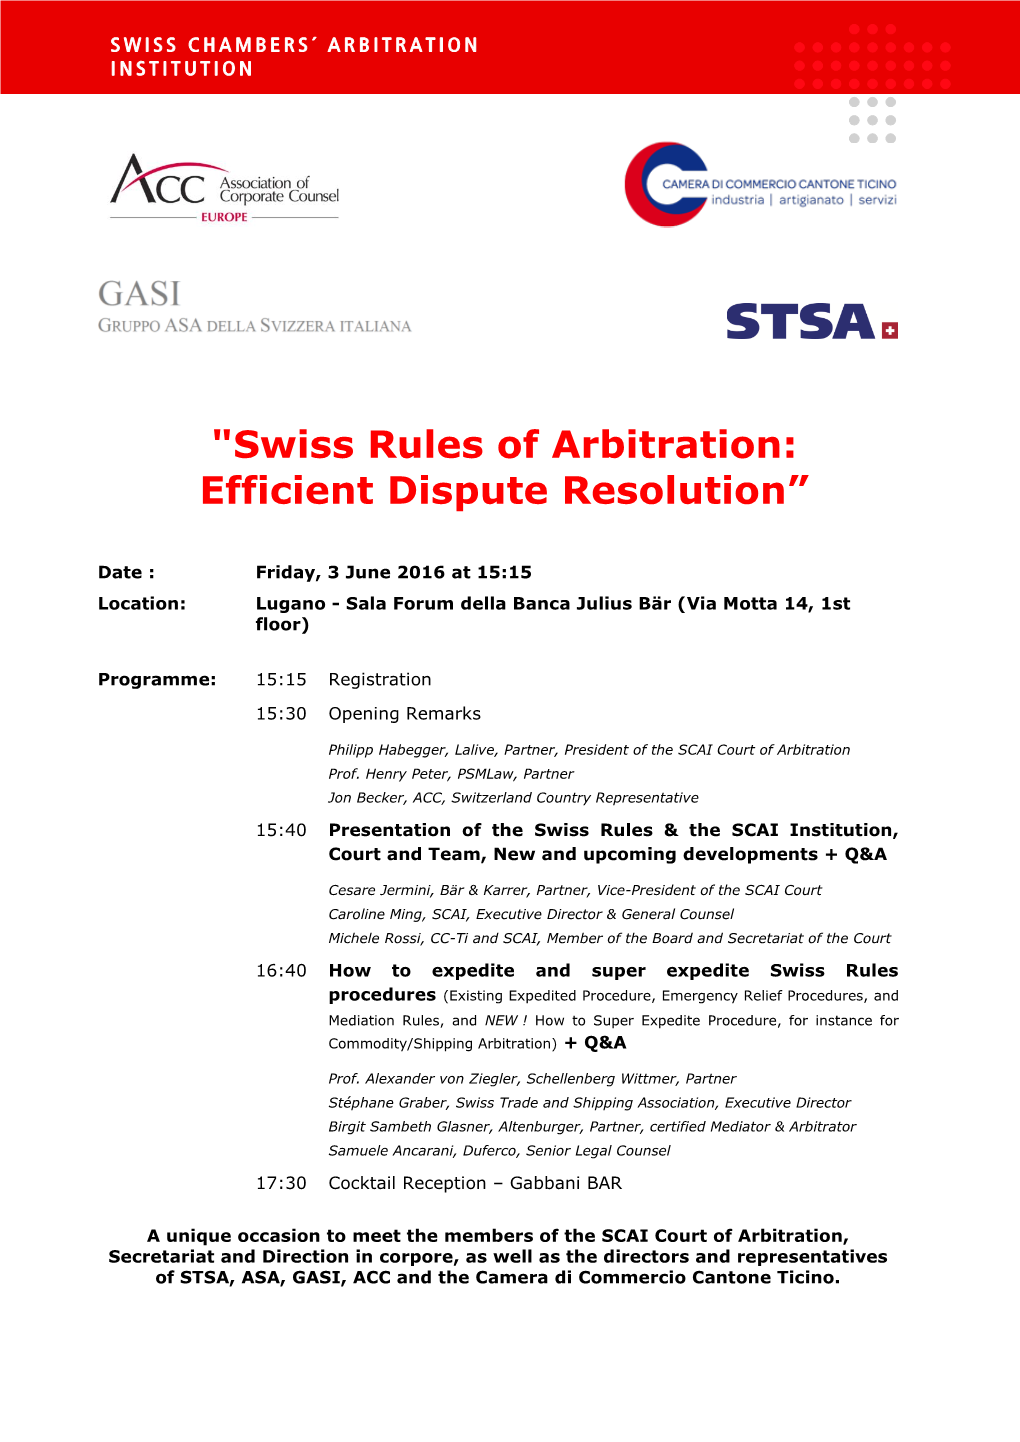 "Swiss Rules of Arbitration: Efficient Dispute Resolution”